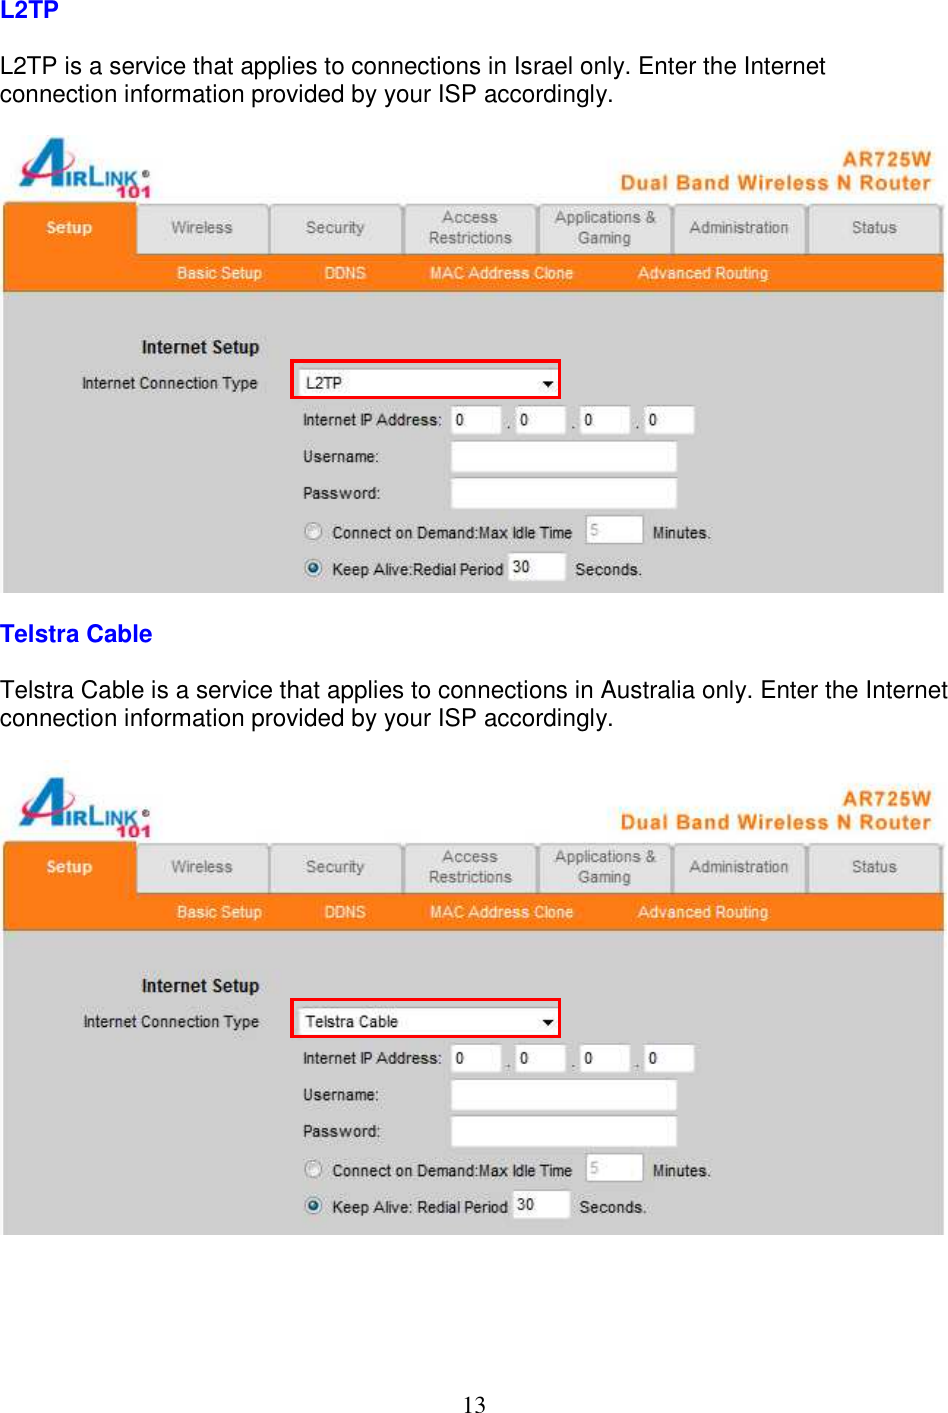 13 L2TP  L2TP is a service that applies to connections in Israel only. Enter the Internet connection information provided by your ISP accordingly.    Telstra Cable  Telstra Cable is a service that applies to connections in Australia only. Enter the Internet connection information provided by your ISP accordingly.        